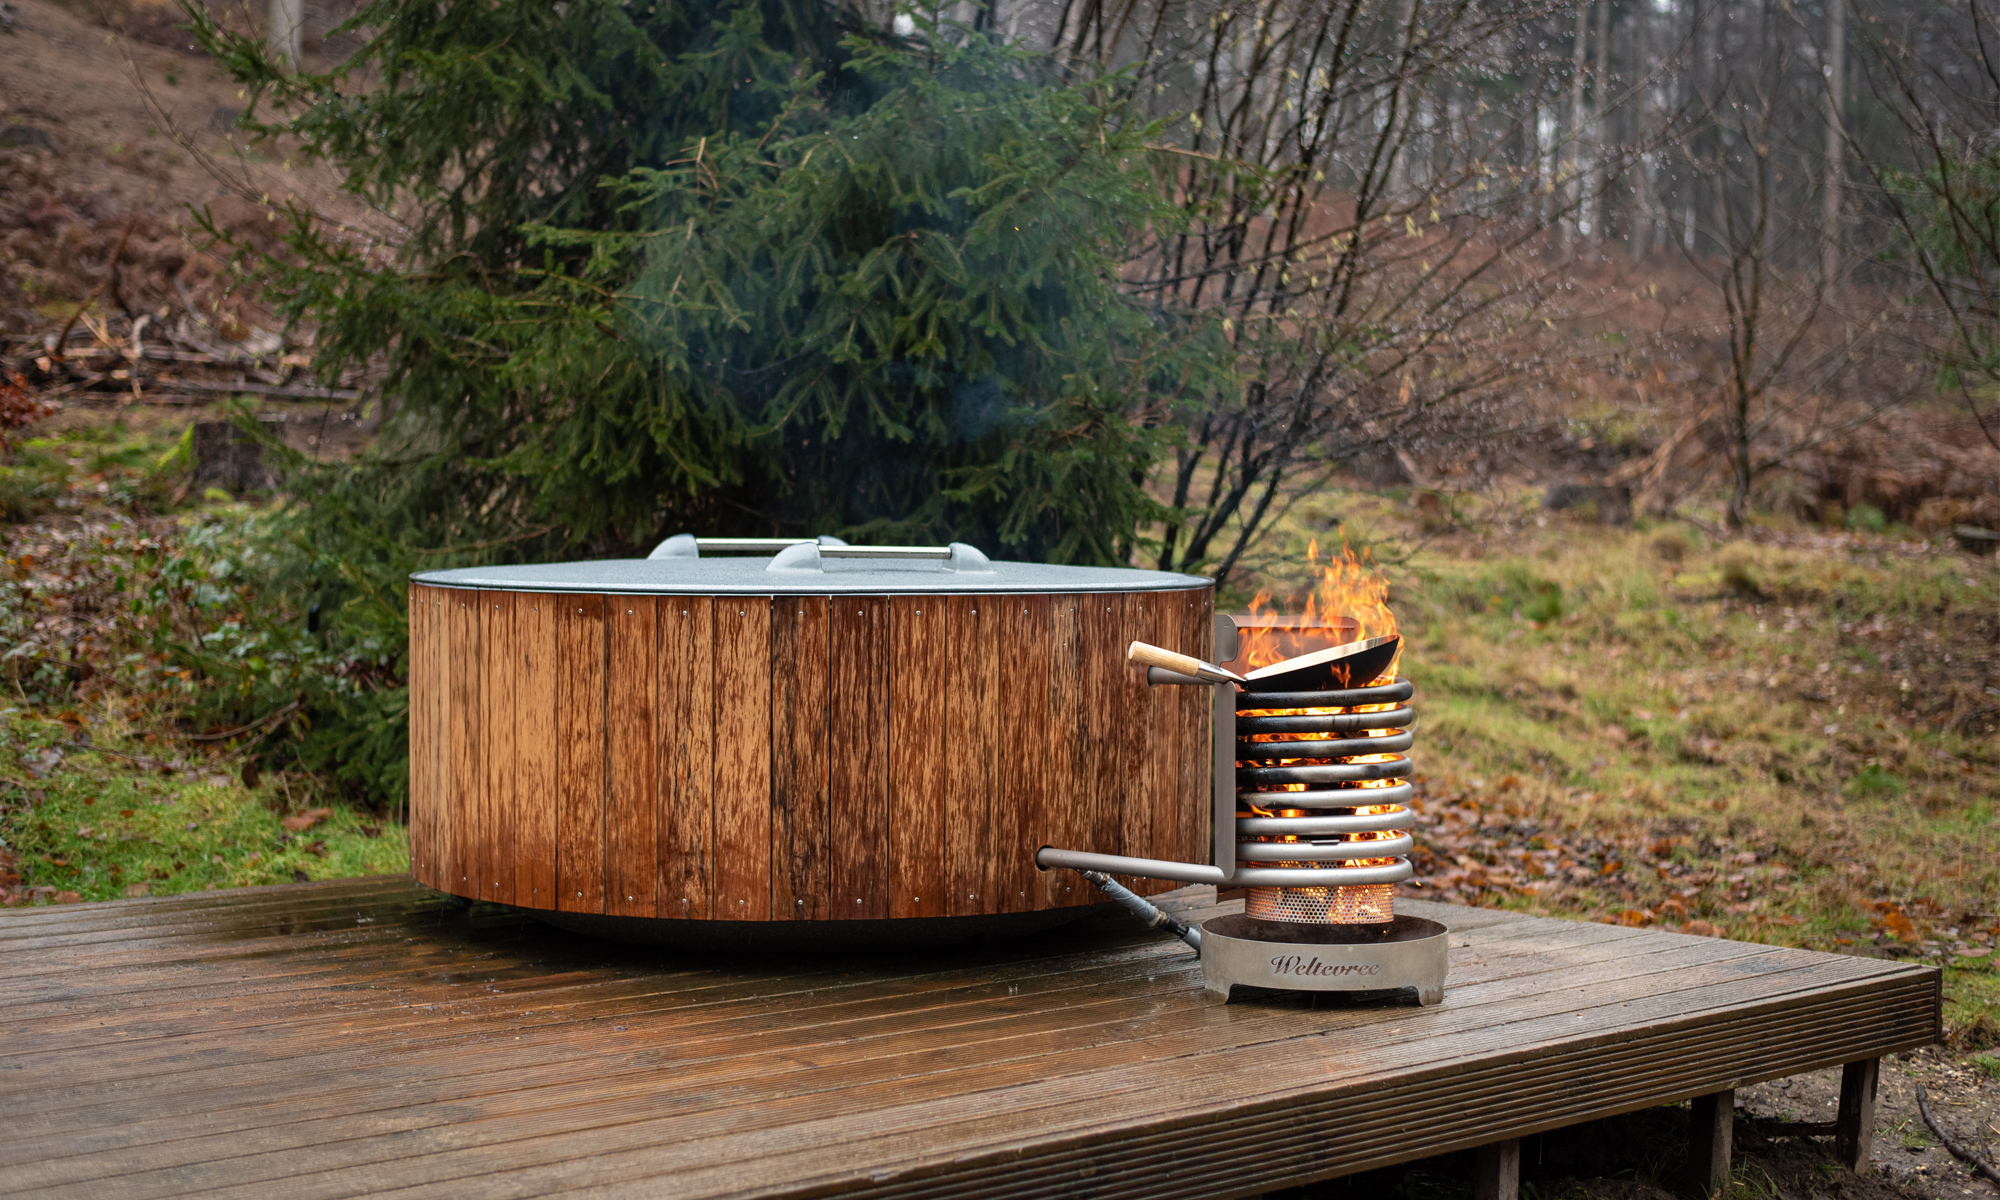 Wood Fired Hot Tub Designs to Relax in Style - Gessato